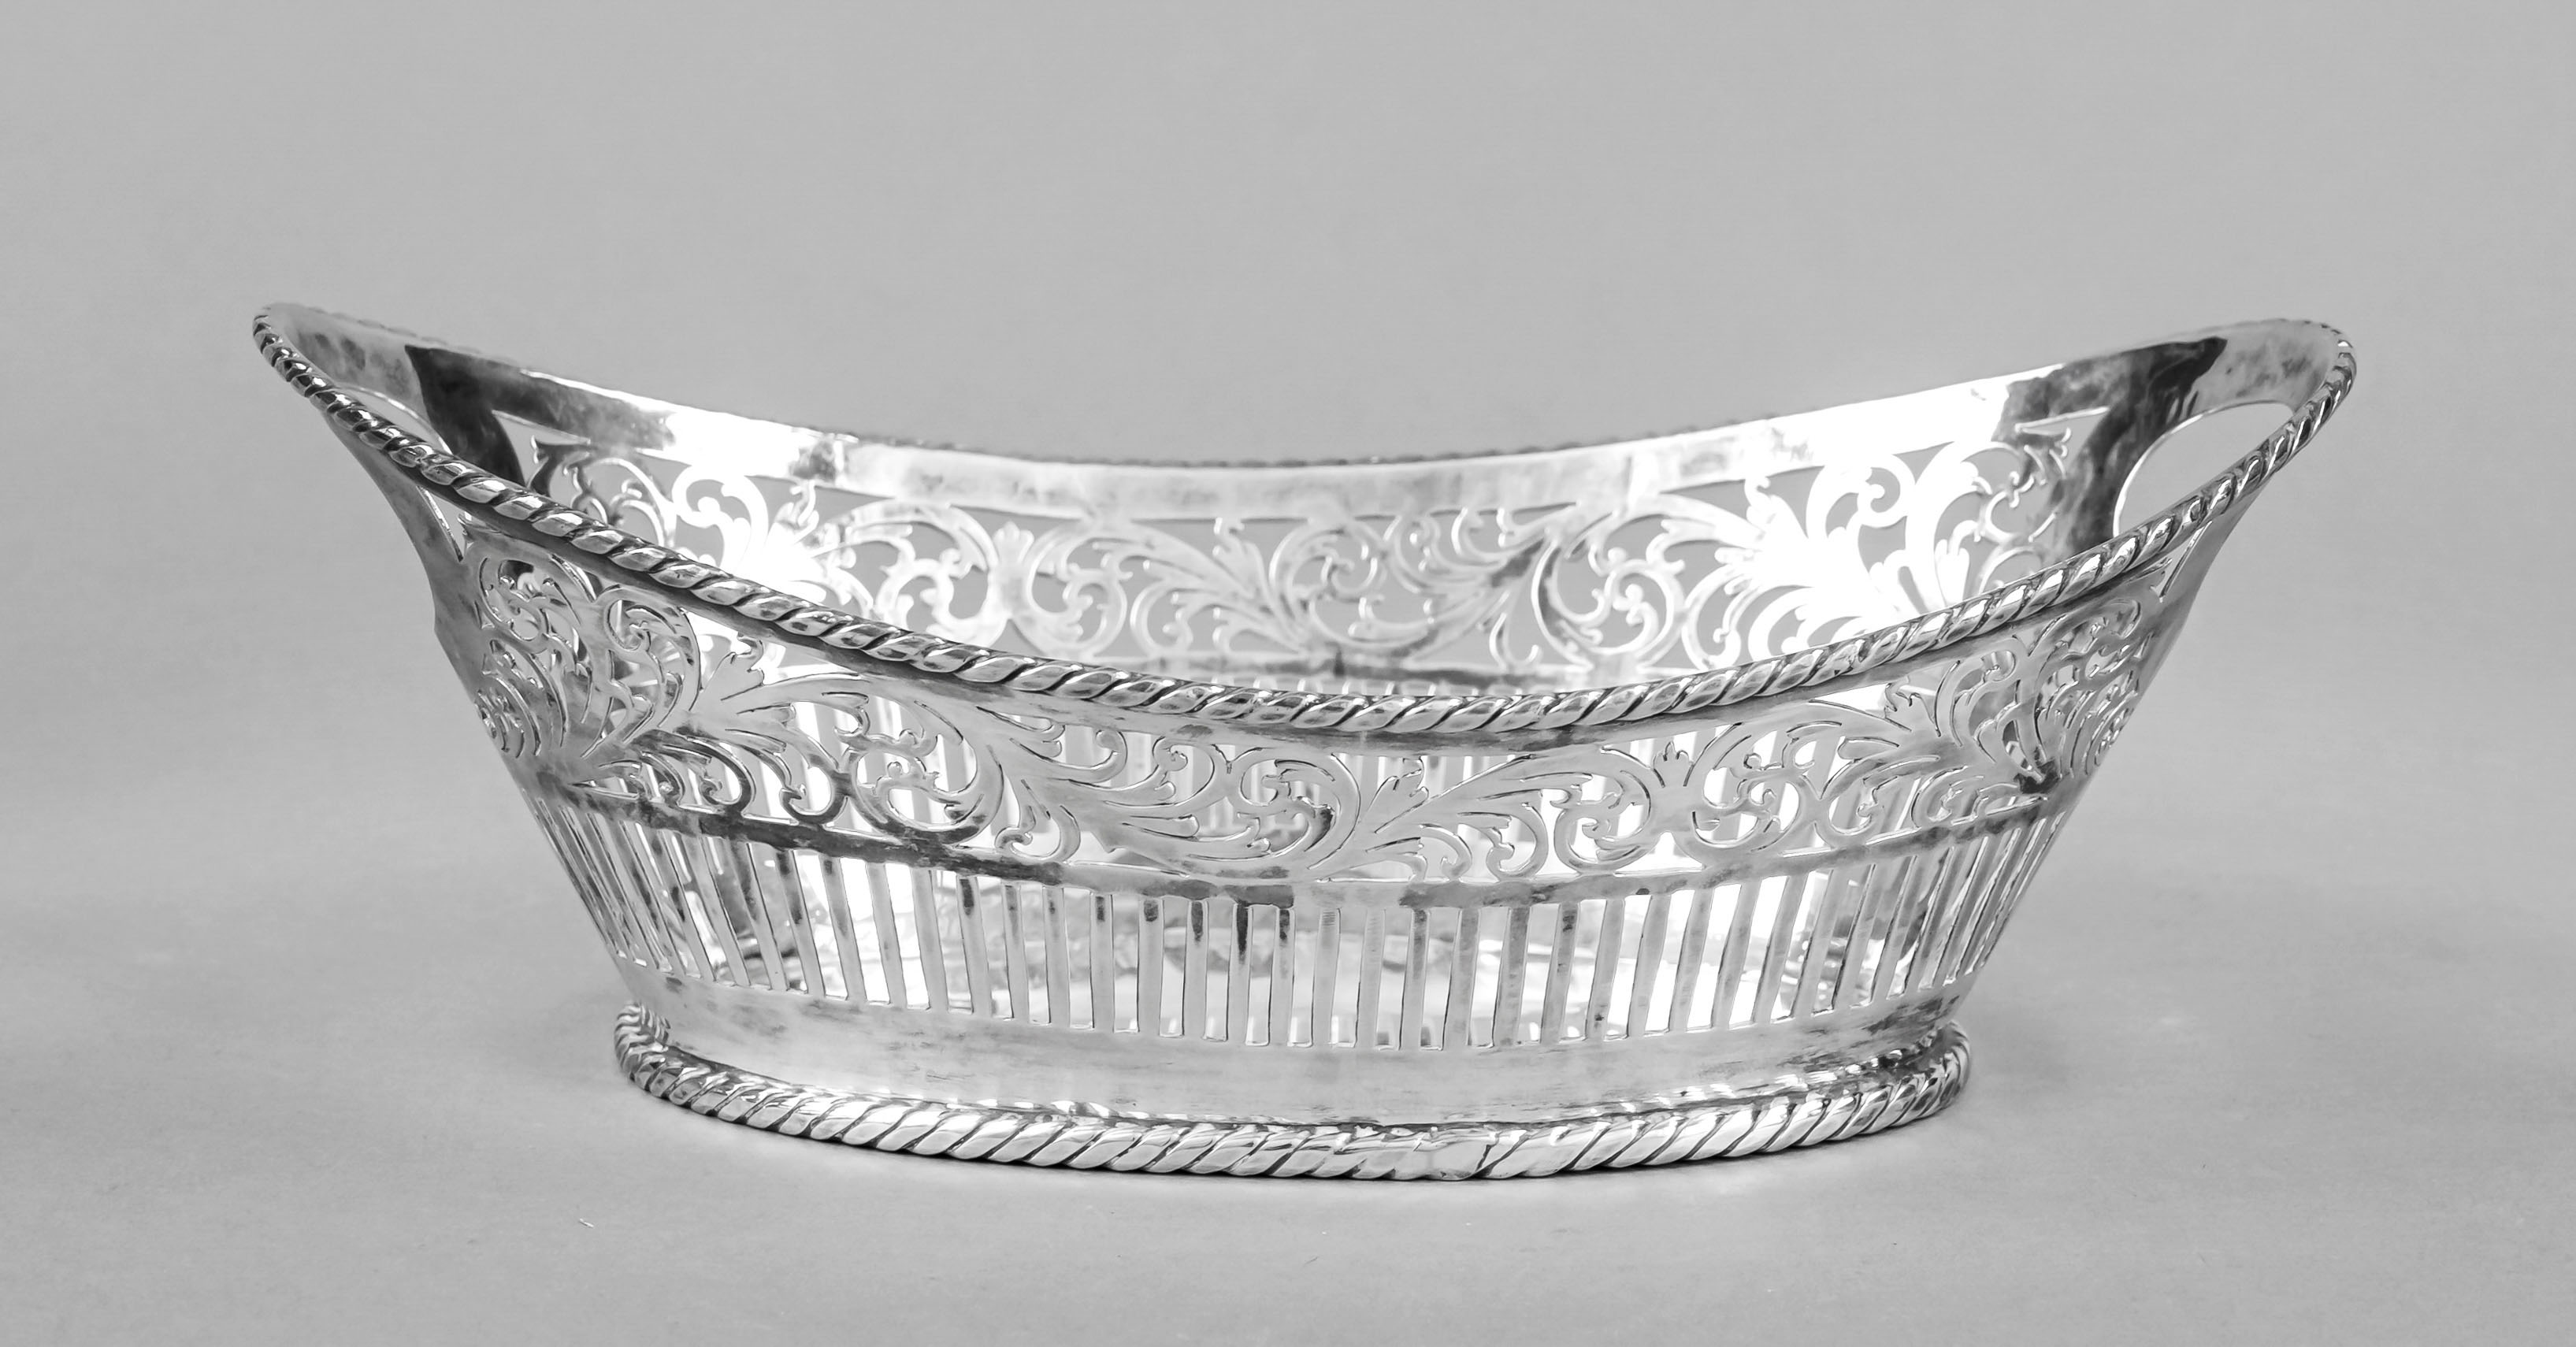 Oval basket bowl, 20th century, marked Jaric, silver 900/000, on stand ring in cord form, body